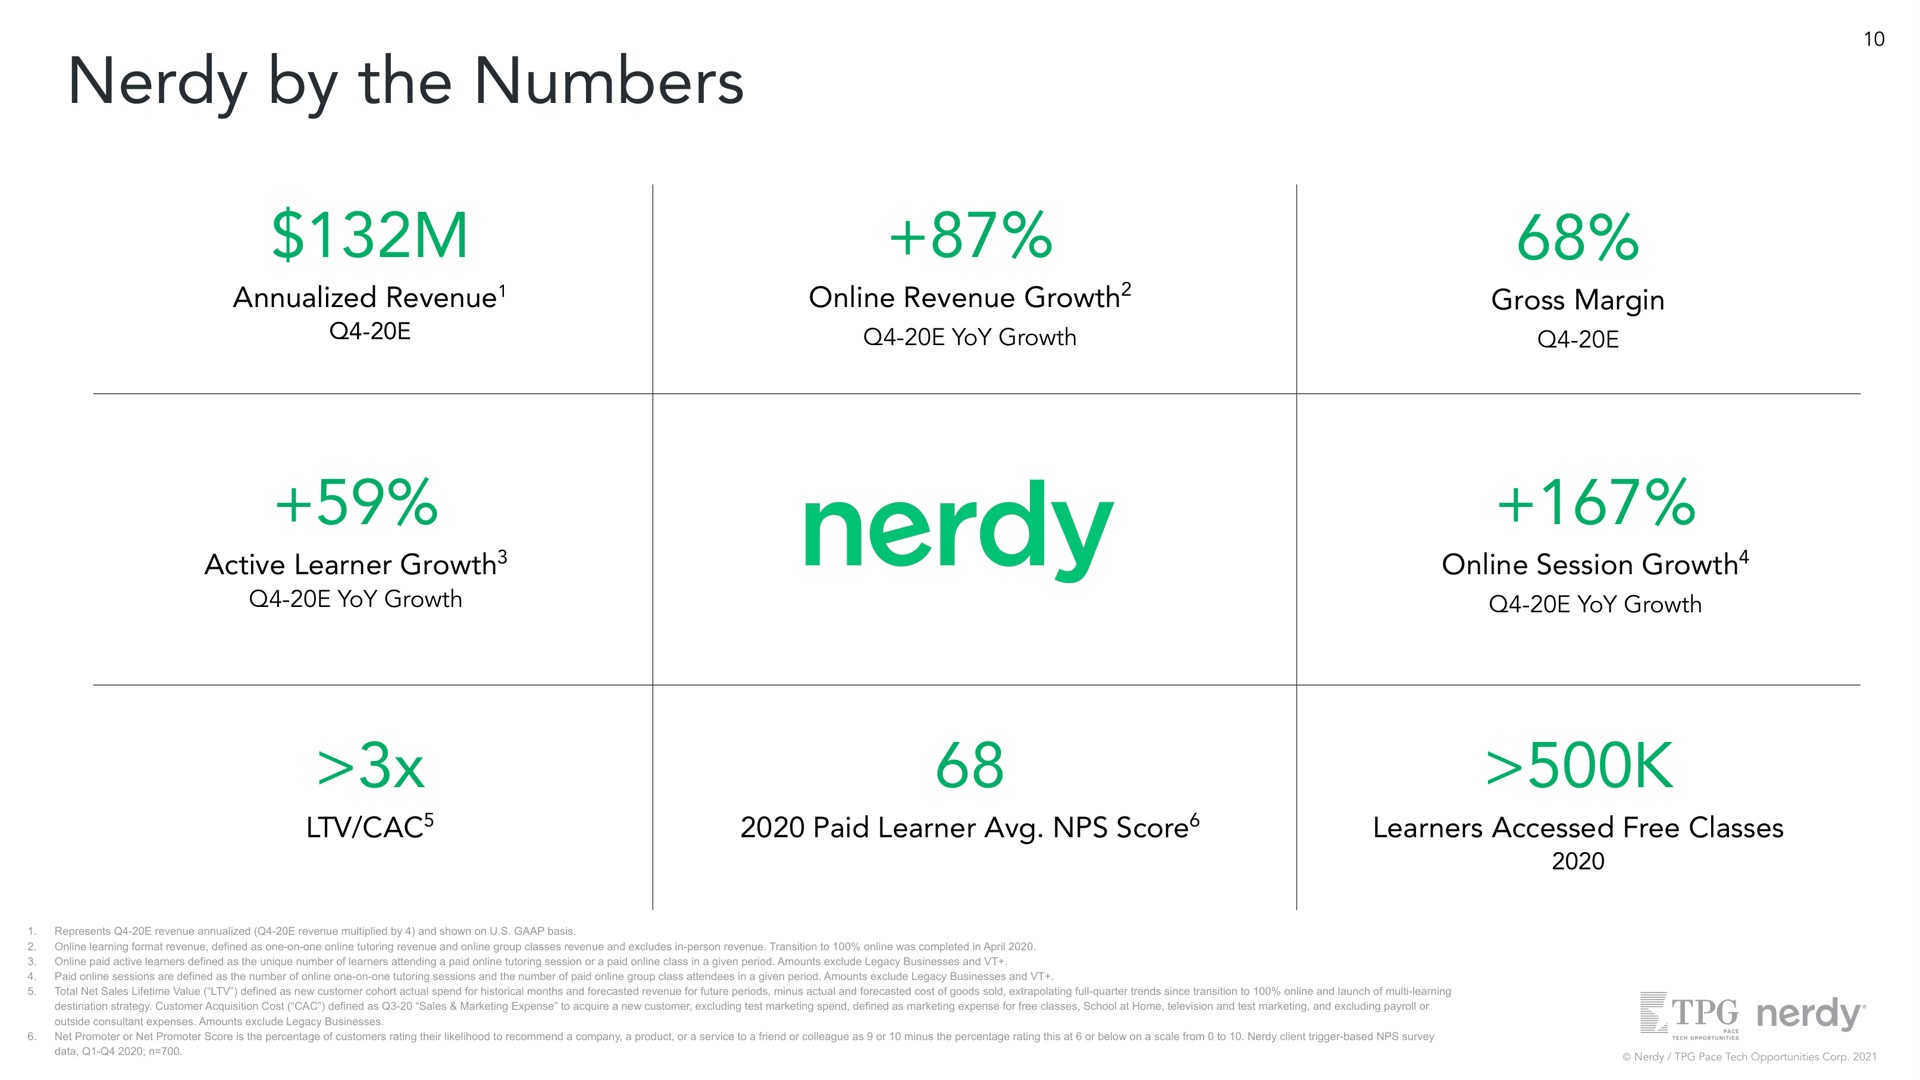 by the numbers revenue active learner growth yoy growth revenue growth yoy growth gross margin session growth yoy growth paid learner score learners accessed free classes | Nerdy